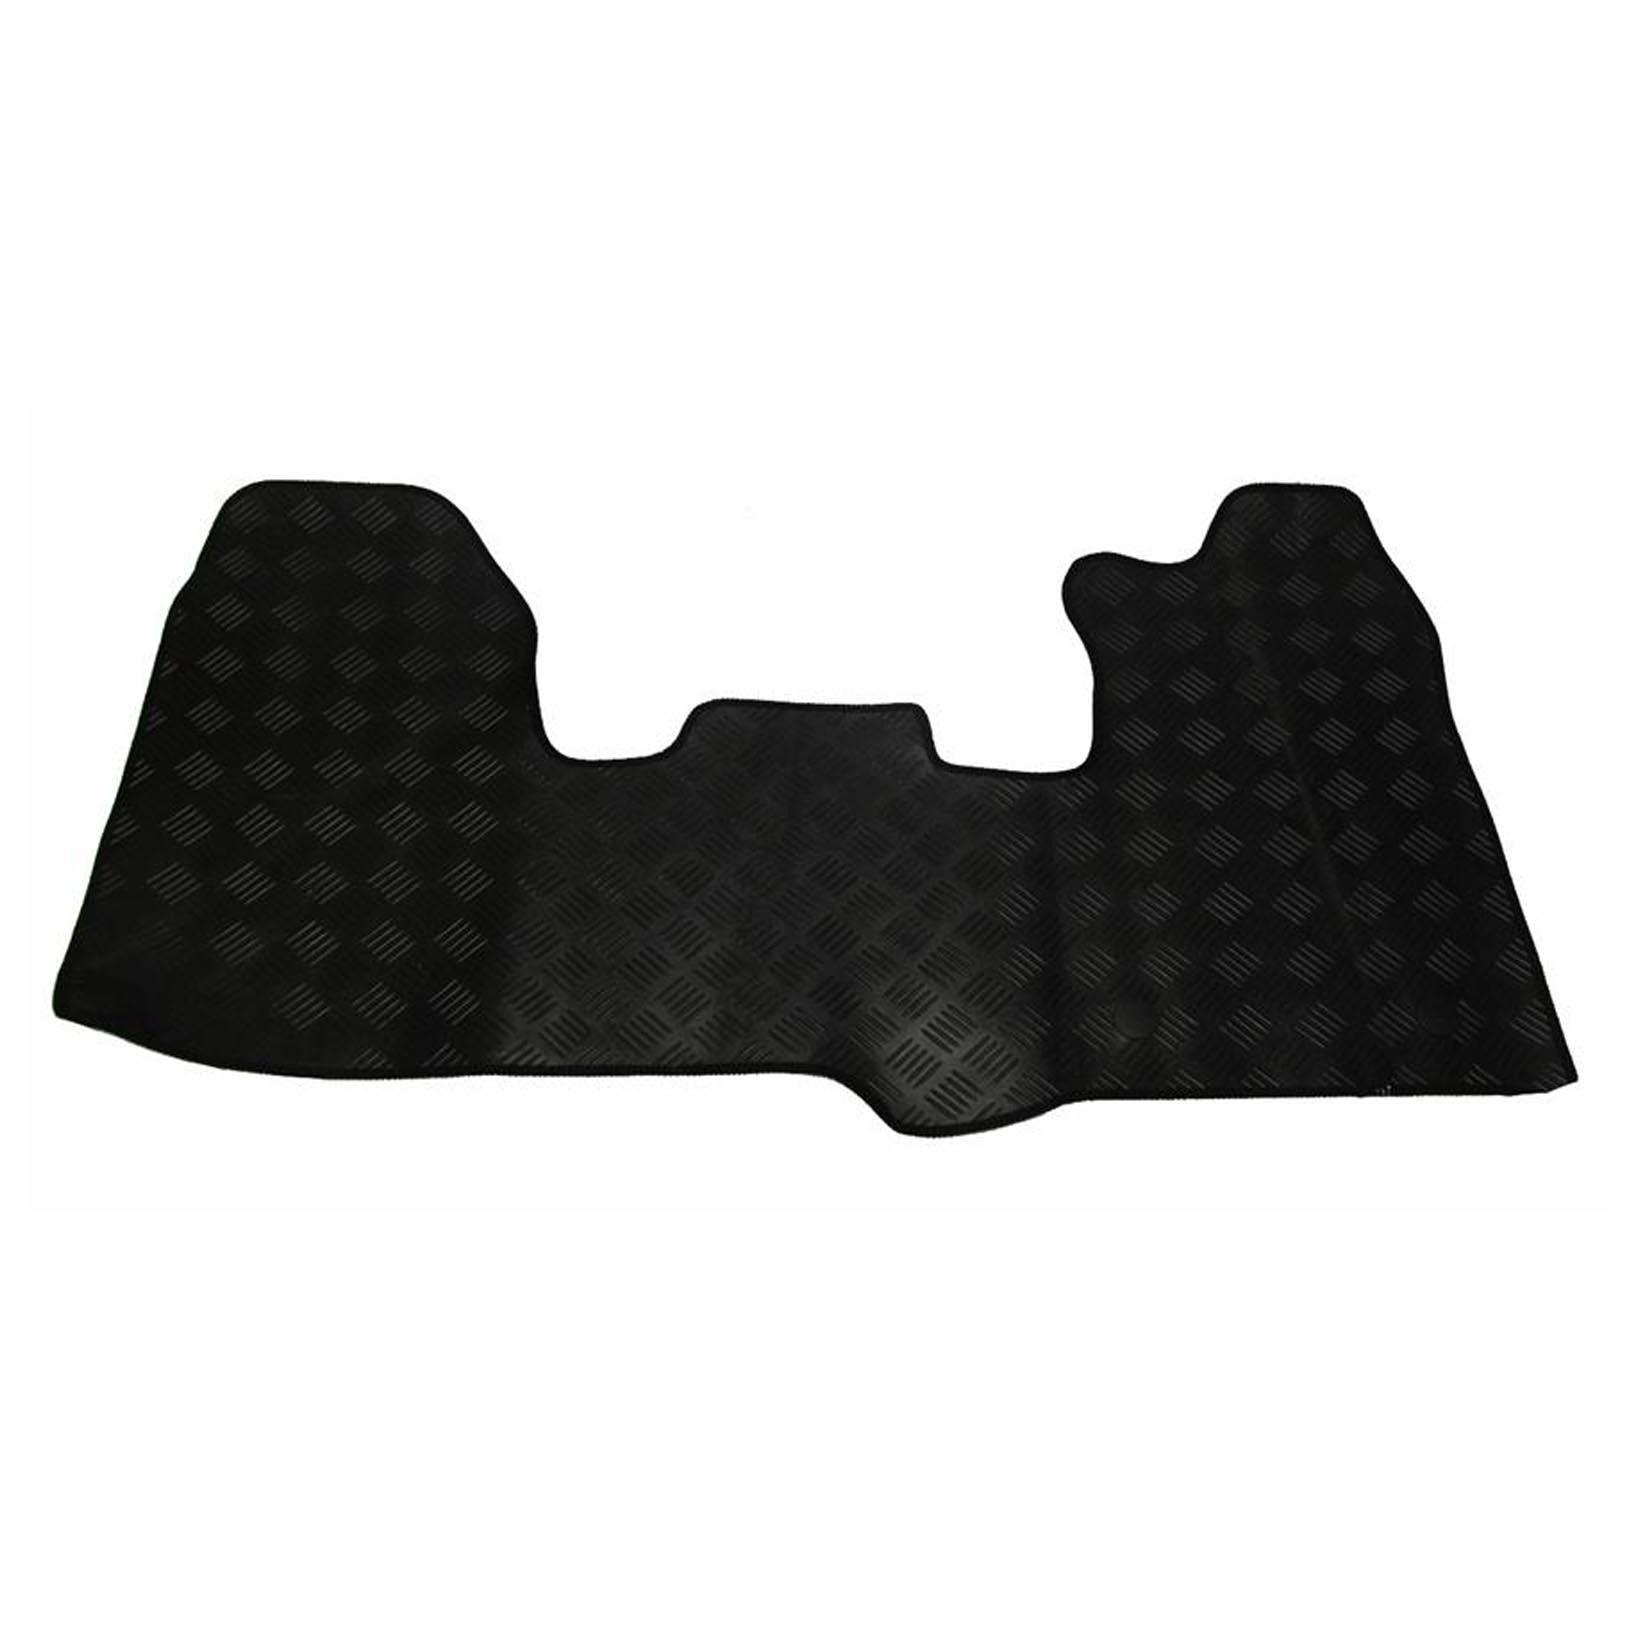 FORD TRANSIT CUSTOM 2012-2015 - STX FRONT TAILORED FIT RUBBER MAT - BLACK - Storm Xccessories2